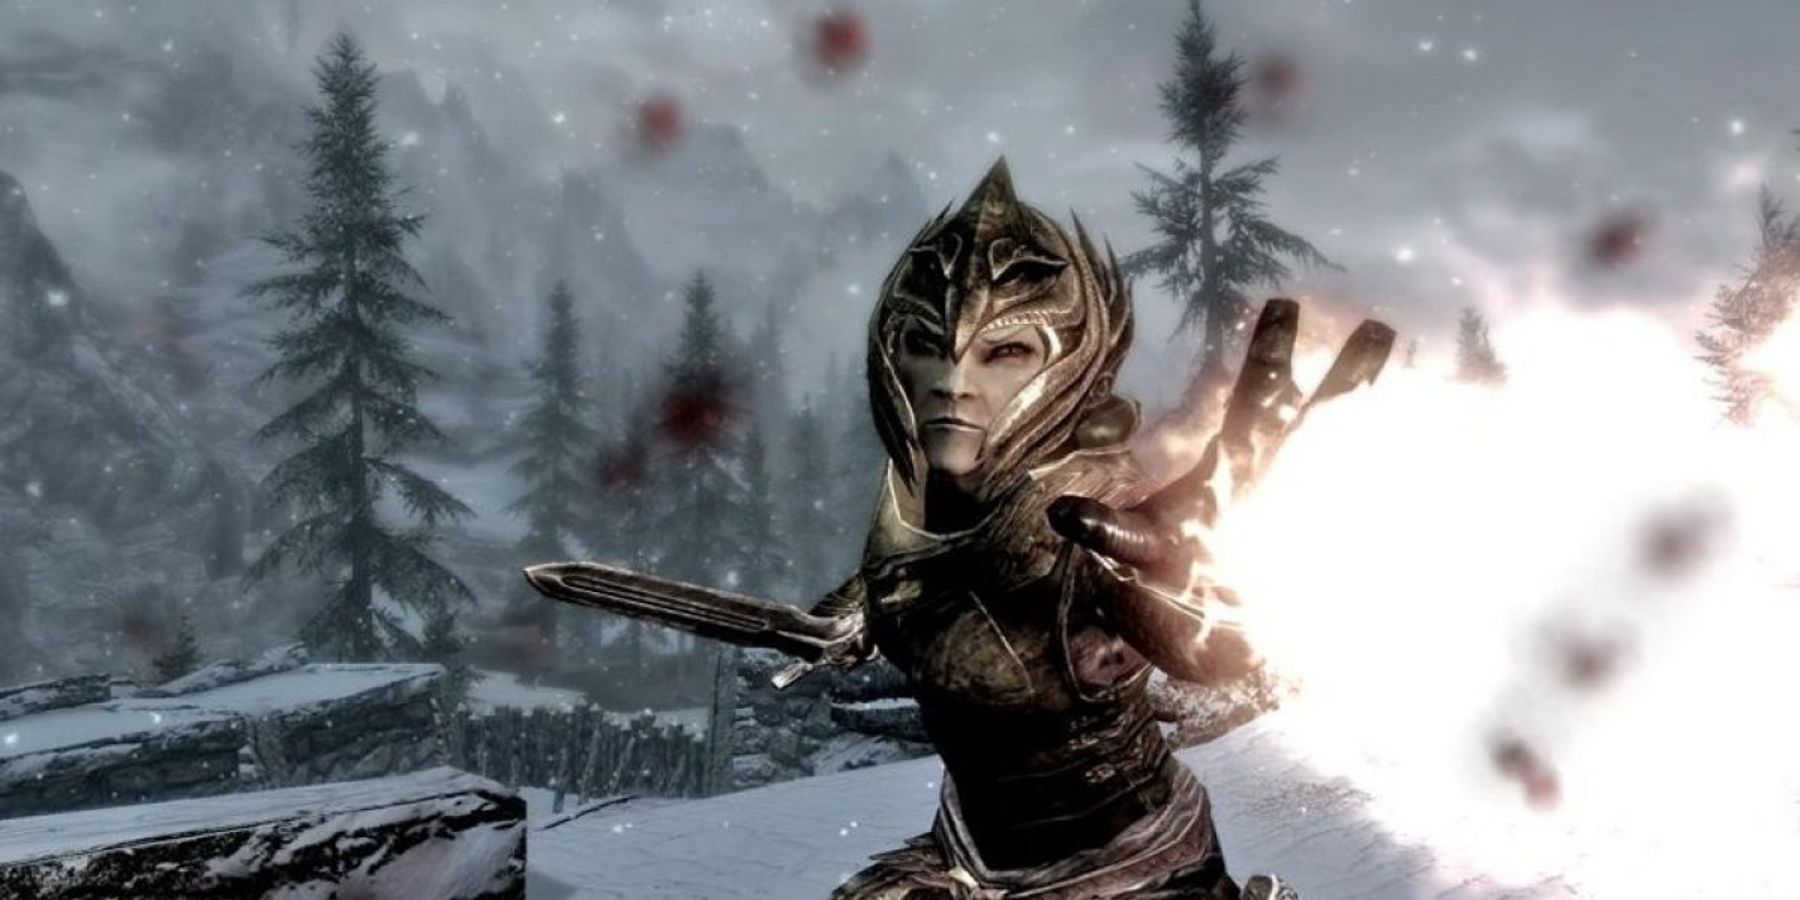 Elder Scrolls 5 combat system - an enemy combatant throws a blast of magic at the player character